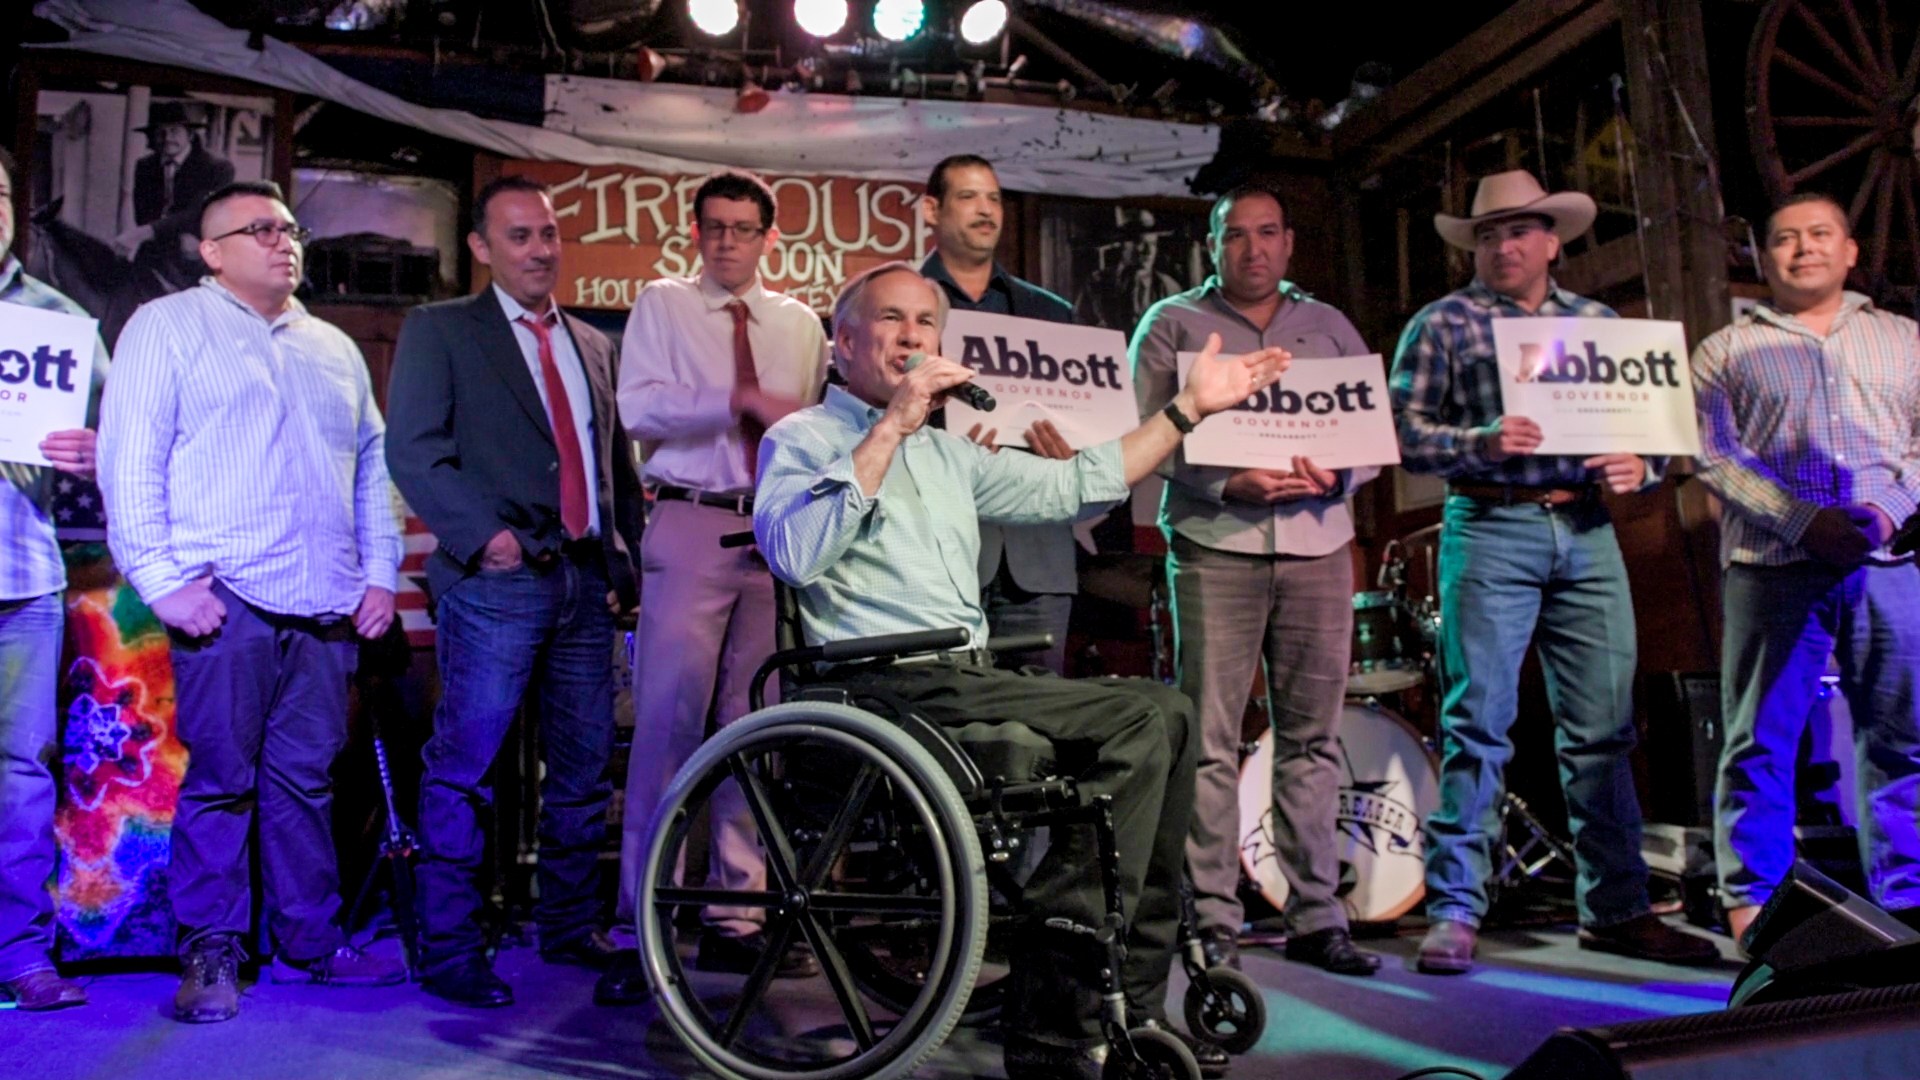 Governor Abbott Attends Early Voting Kick Off Concert And Receives Support From Organization Of Spanish Speaking Officers